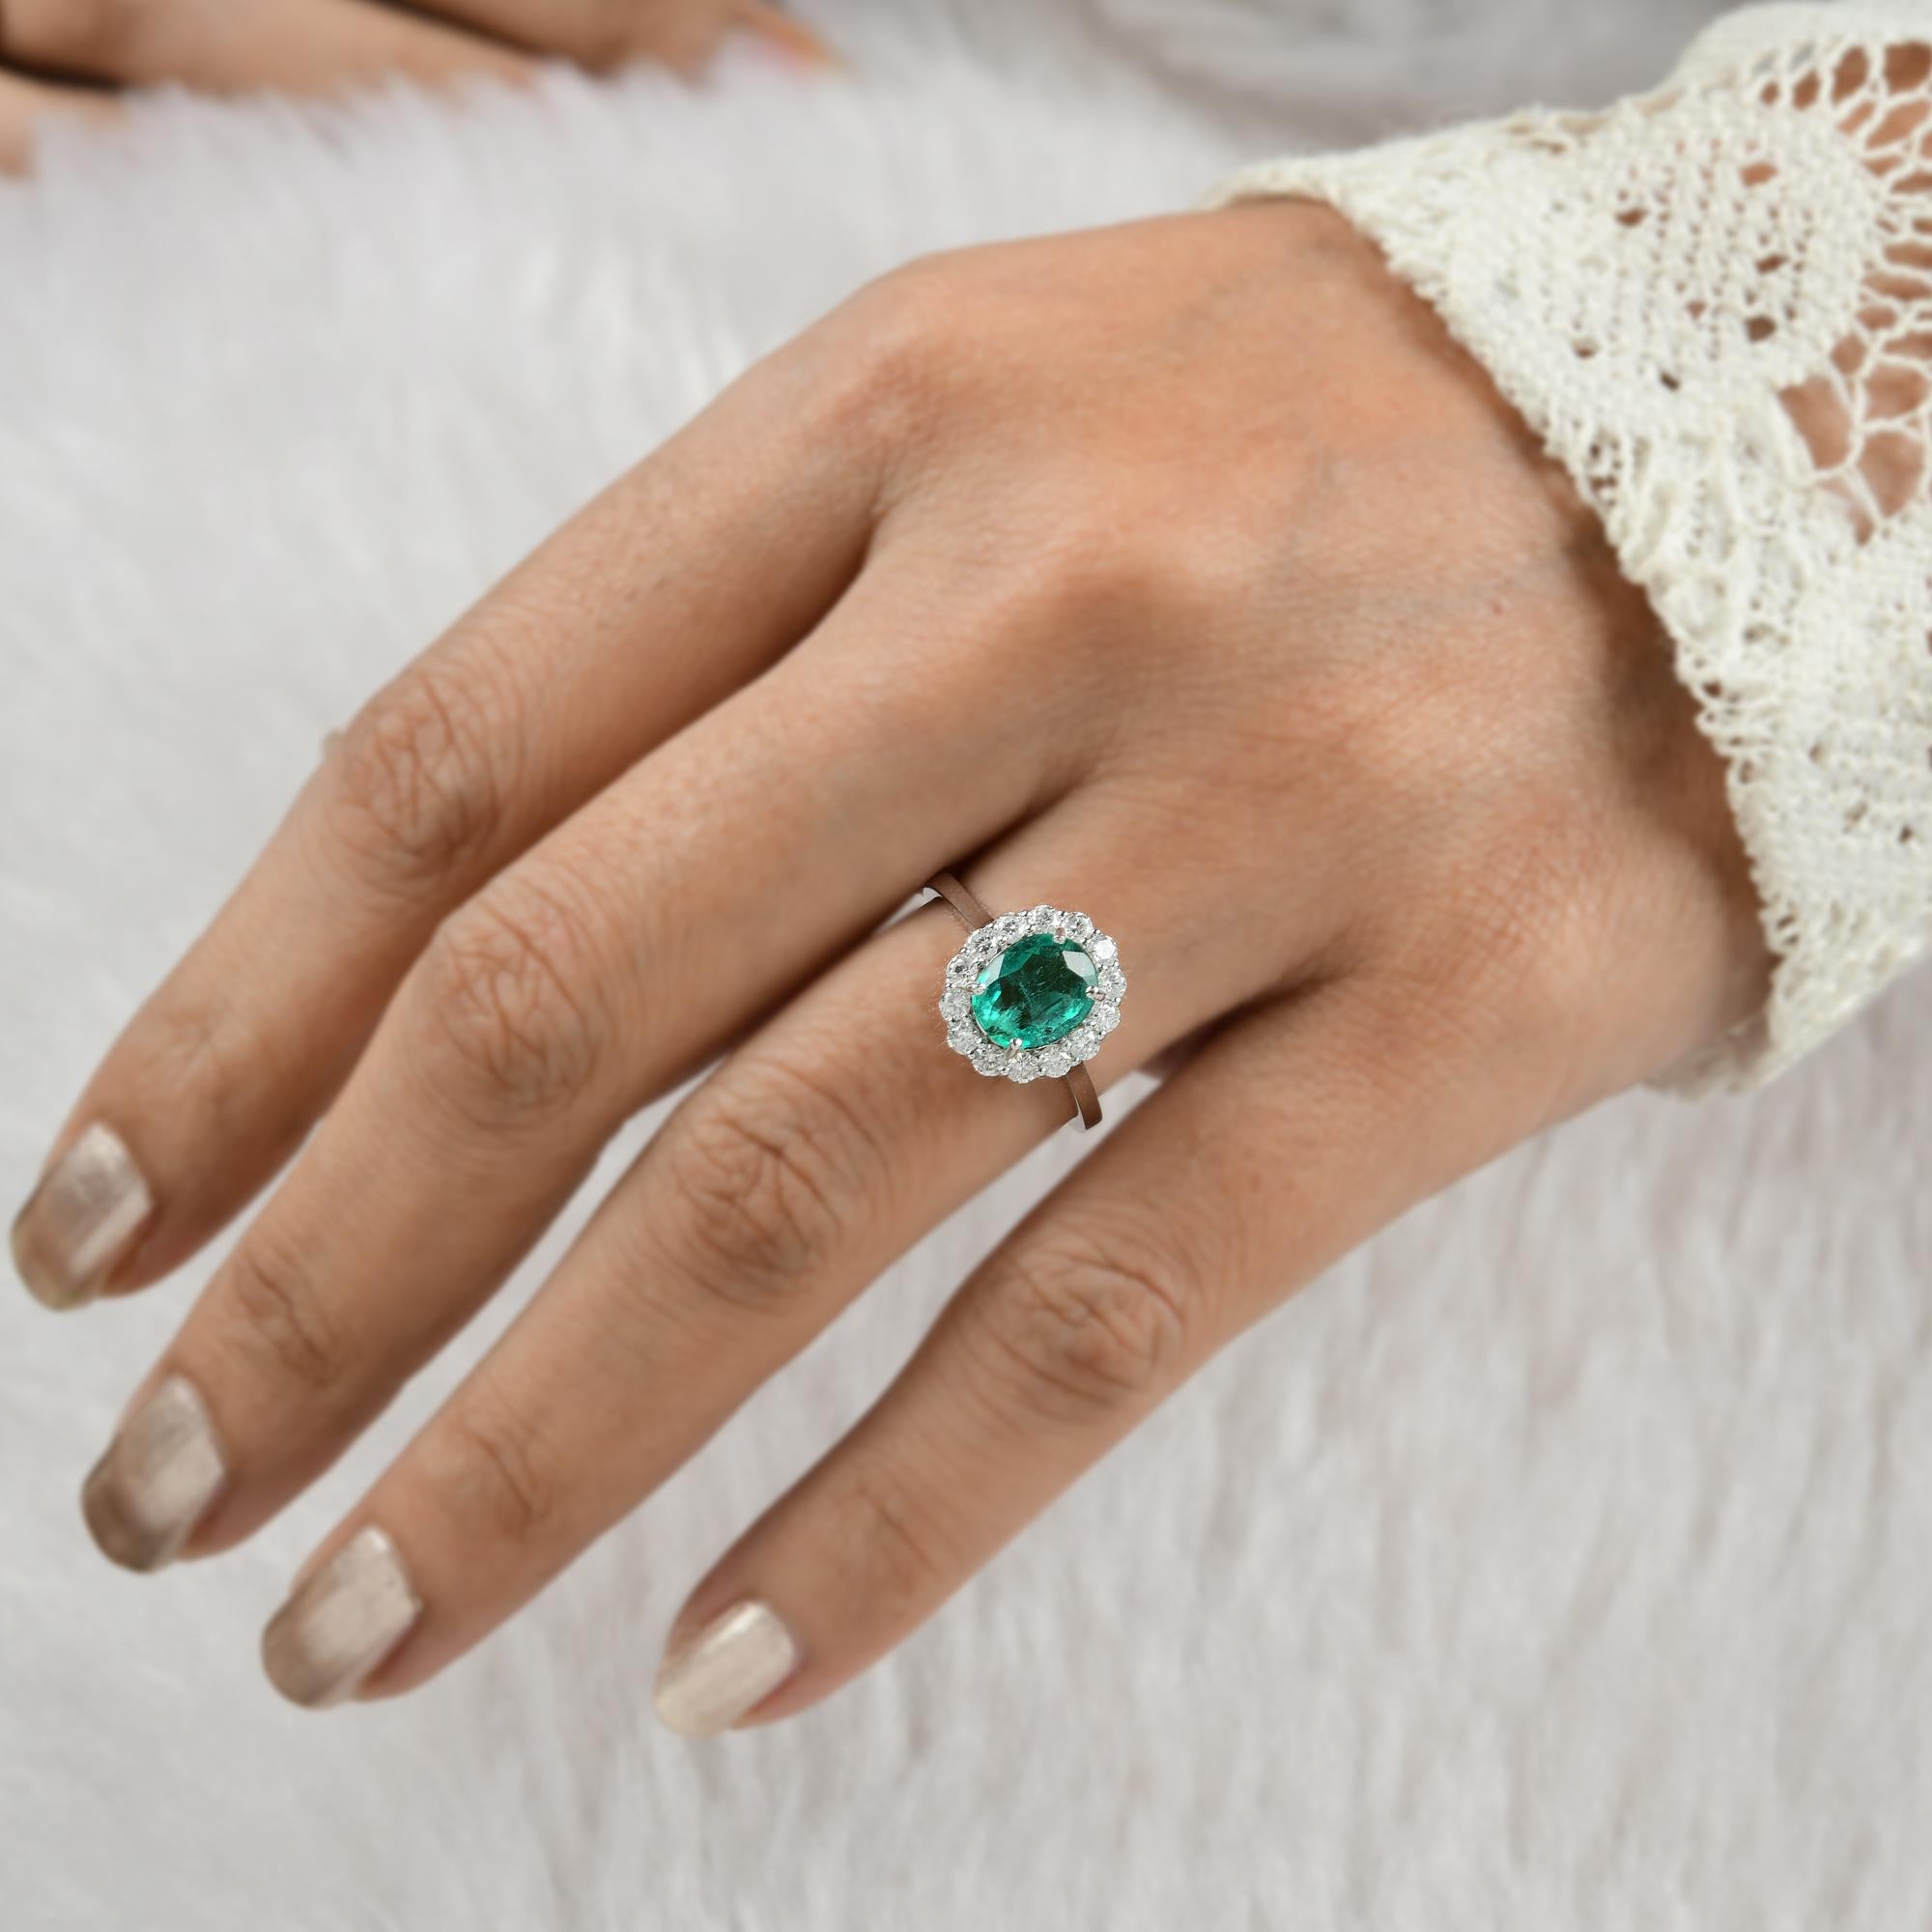 Oval Cut Oval Natural Emerald Gemstone Ring Round Diamond 18 Karat White Gold Jewelry For Sale